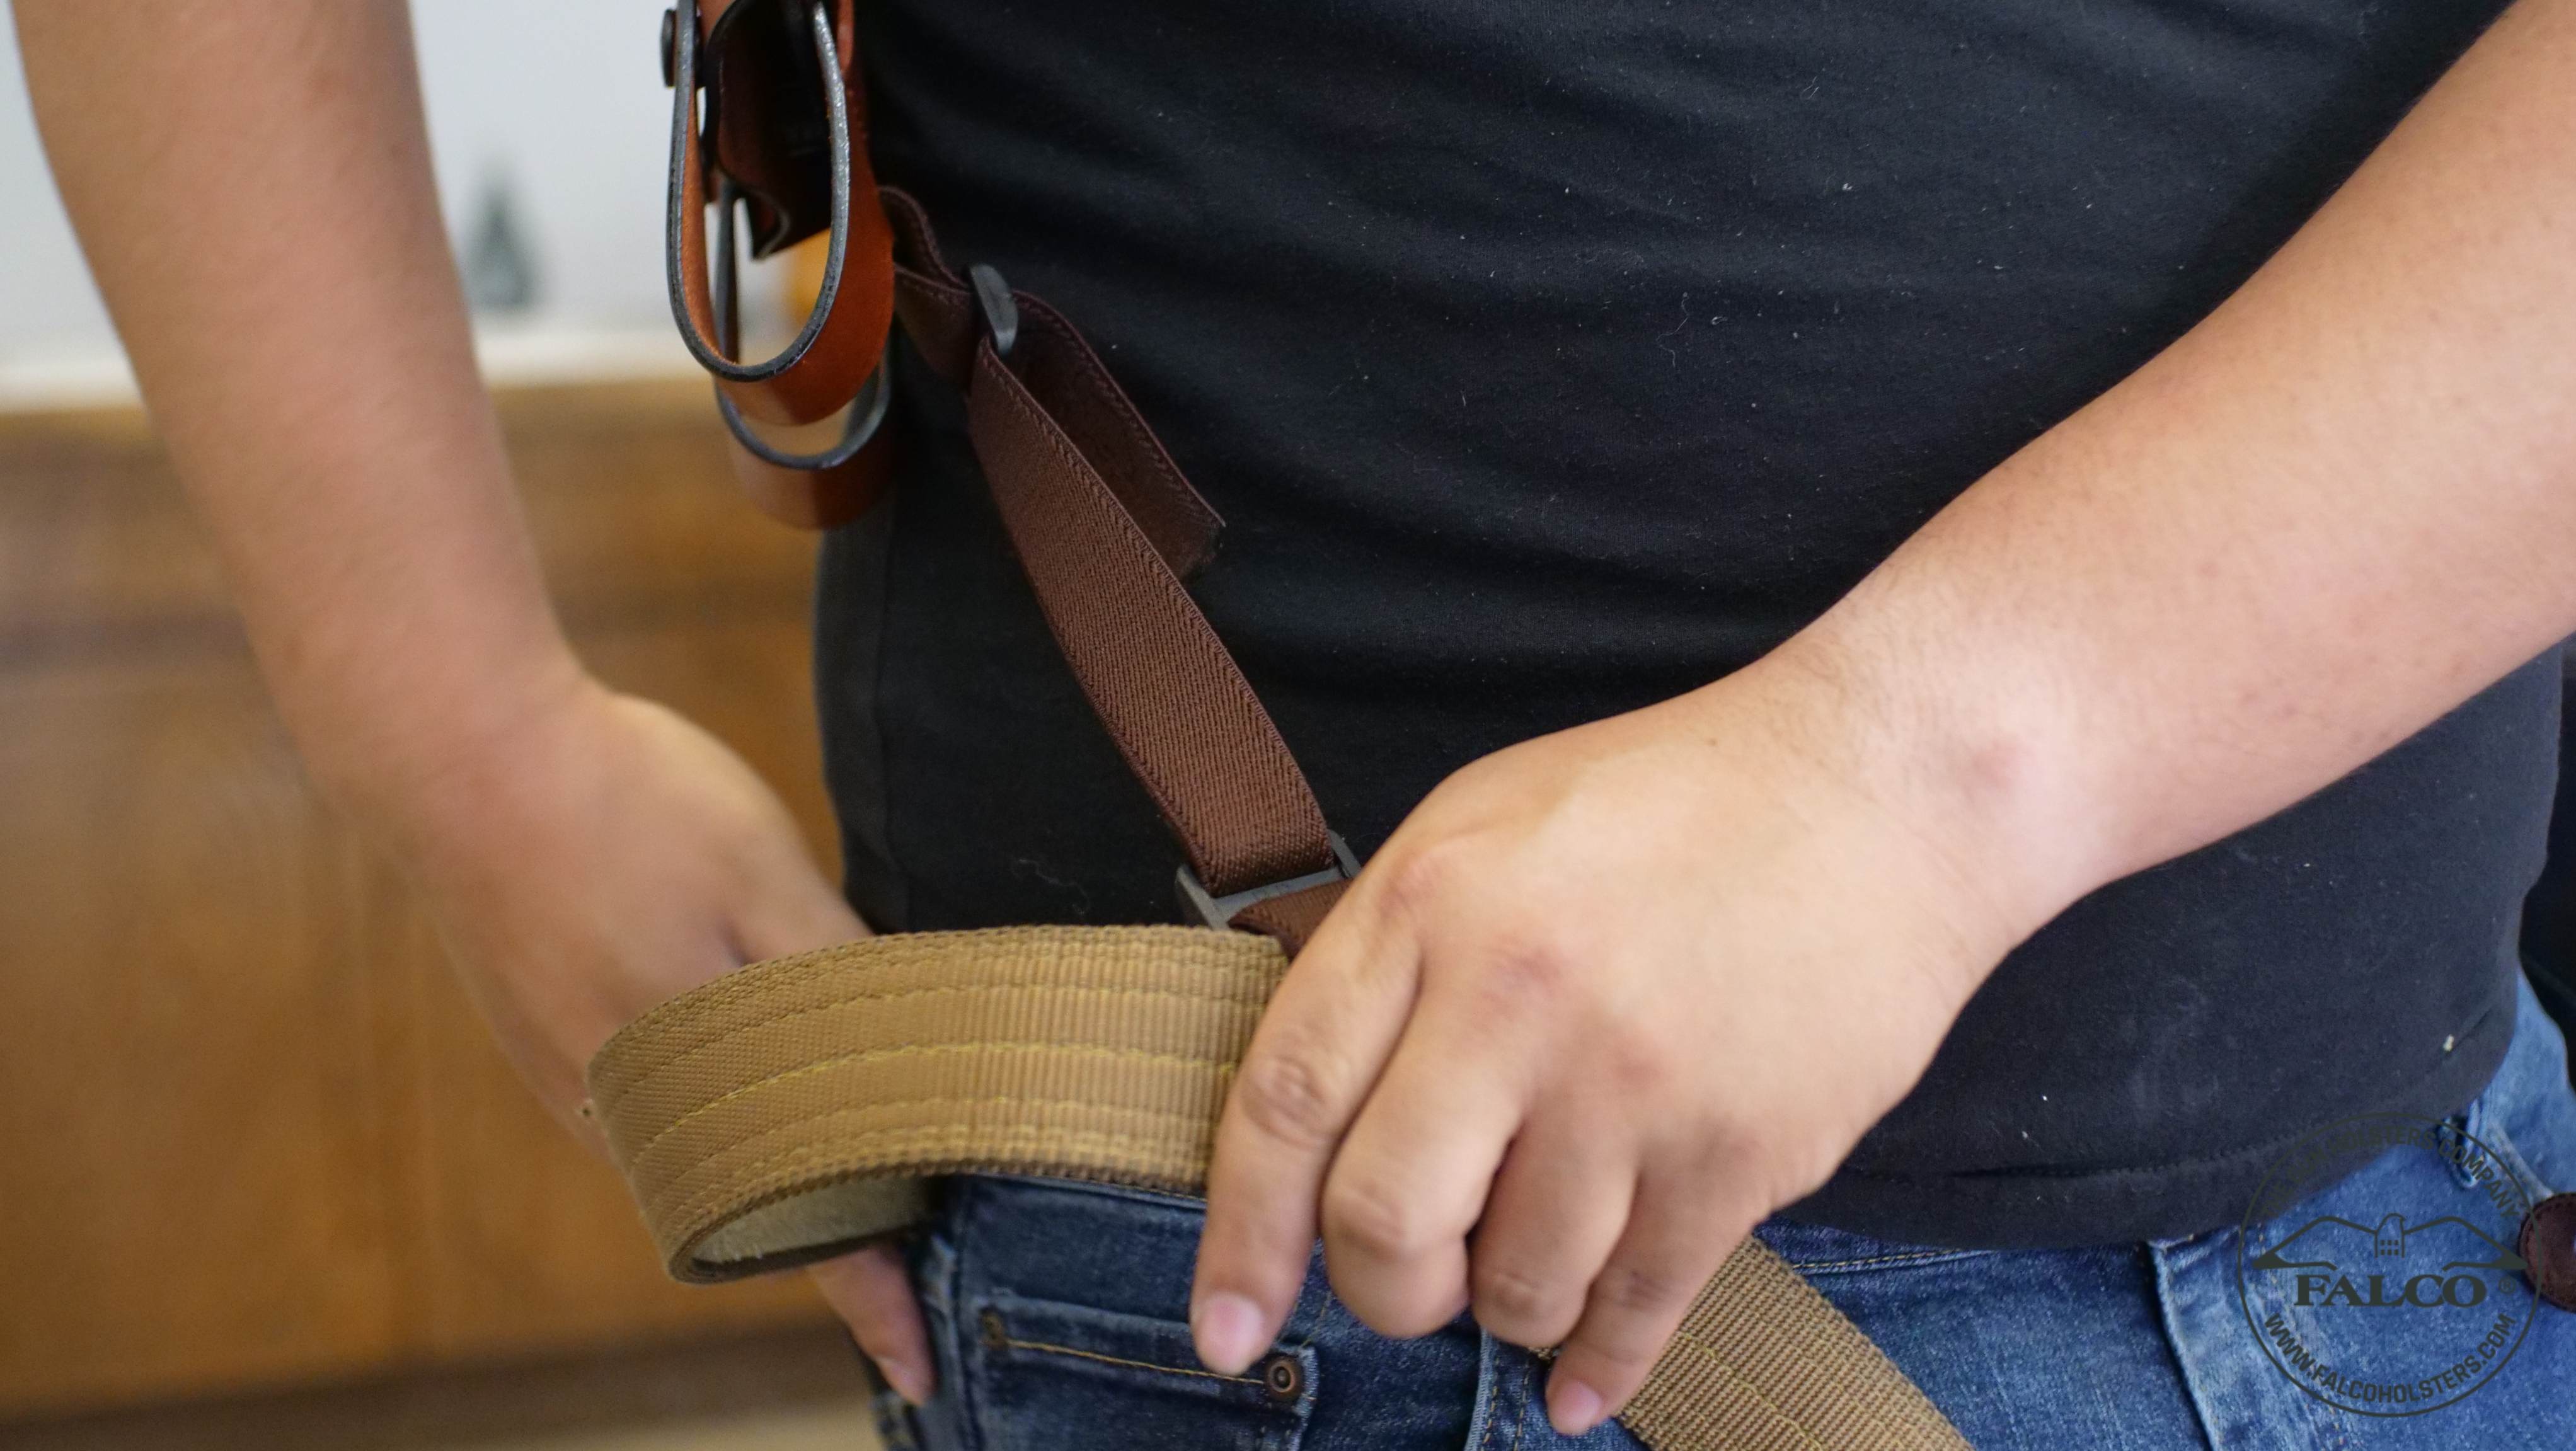 Belly Band Holsters for Women: A Must-Have Accessory for Modern Safety